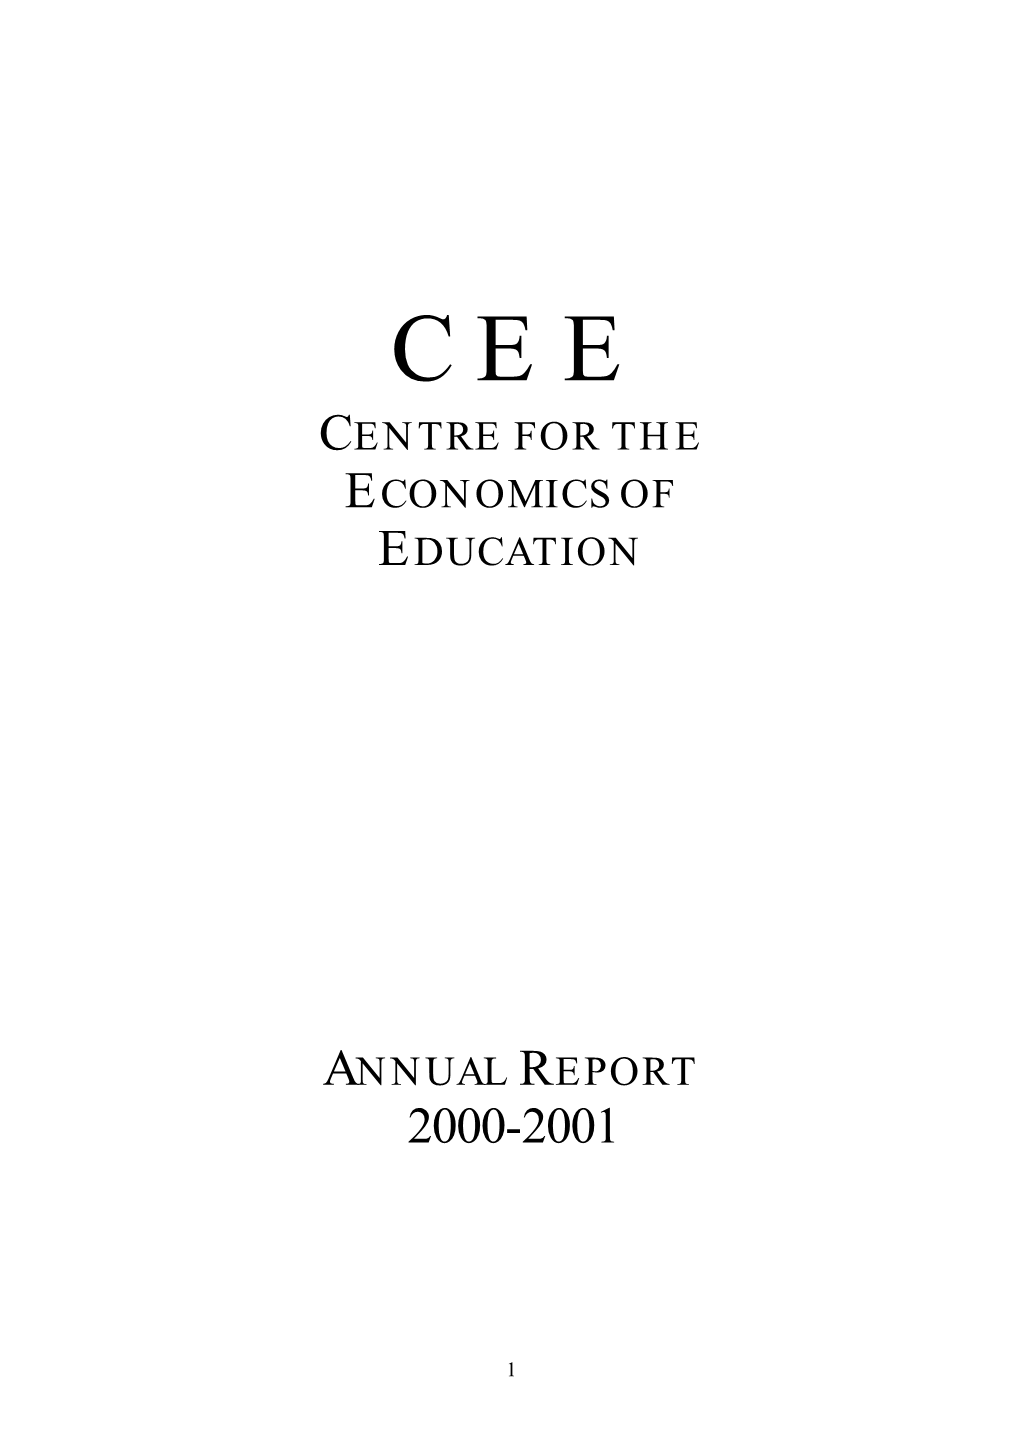 Centre for the Economics of Education Annual Report